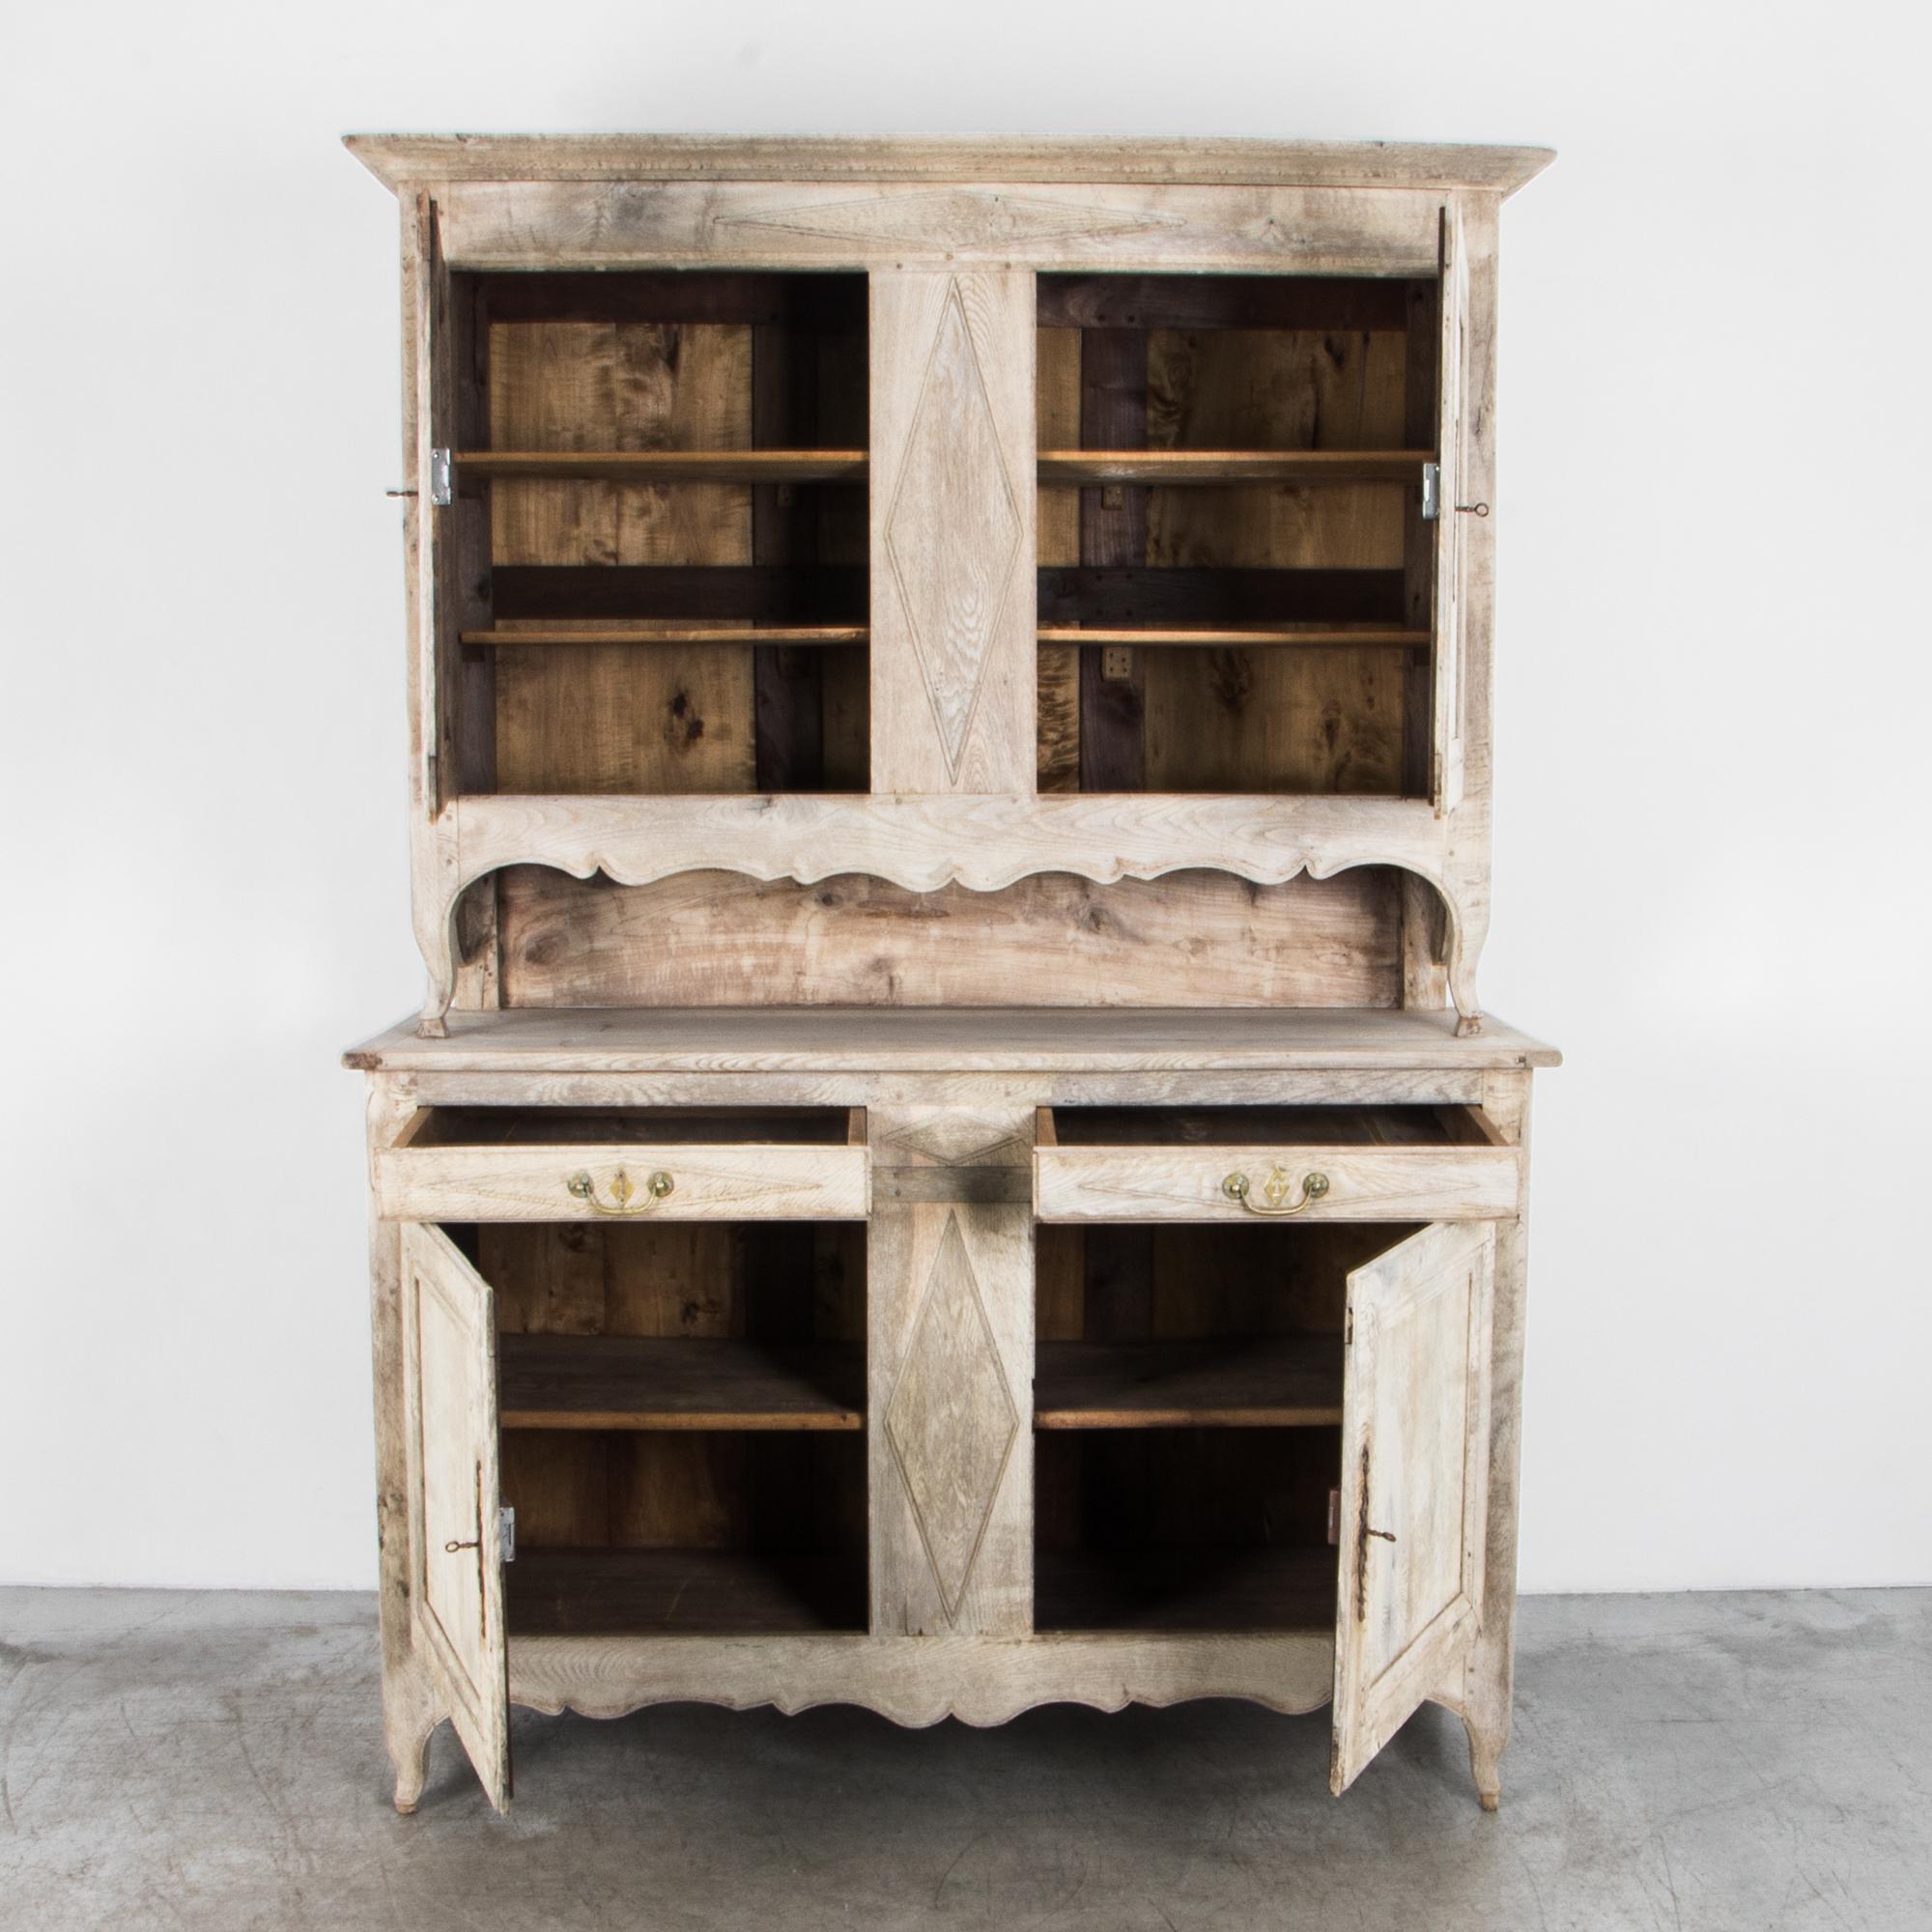 This antique oak cabinet hails from 1880s, France. Fully refinished and restored, the bleached oak exterior opens to reveal a striking dark finish. A buffet “a deux corps,” or “in two bodies,” combines an upper and a lower cabinet, each with two